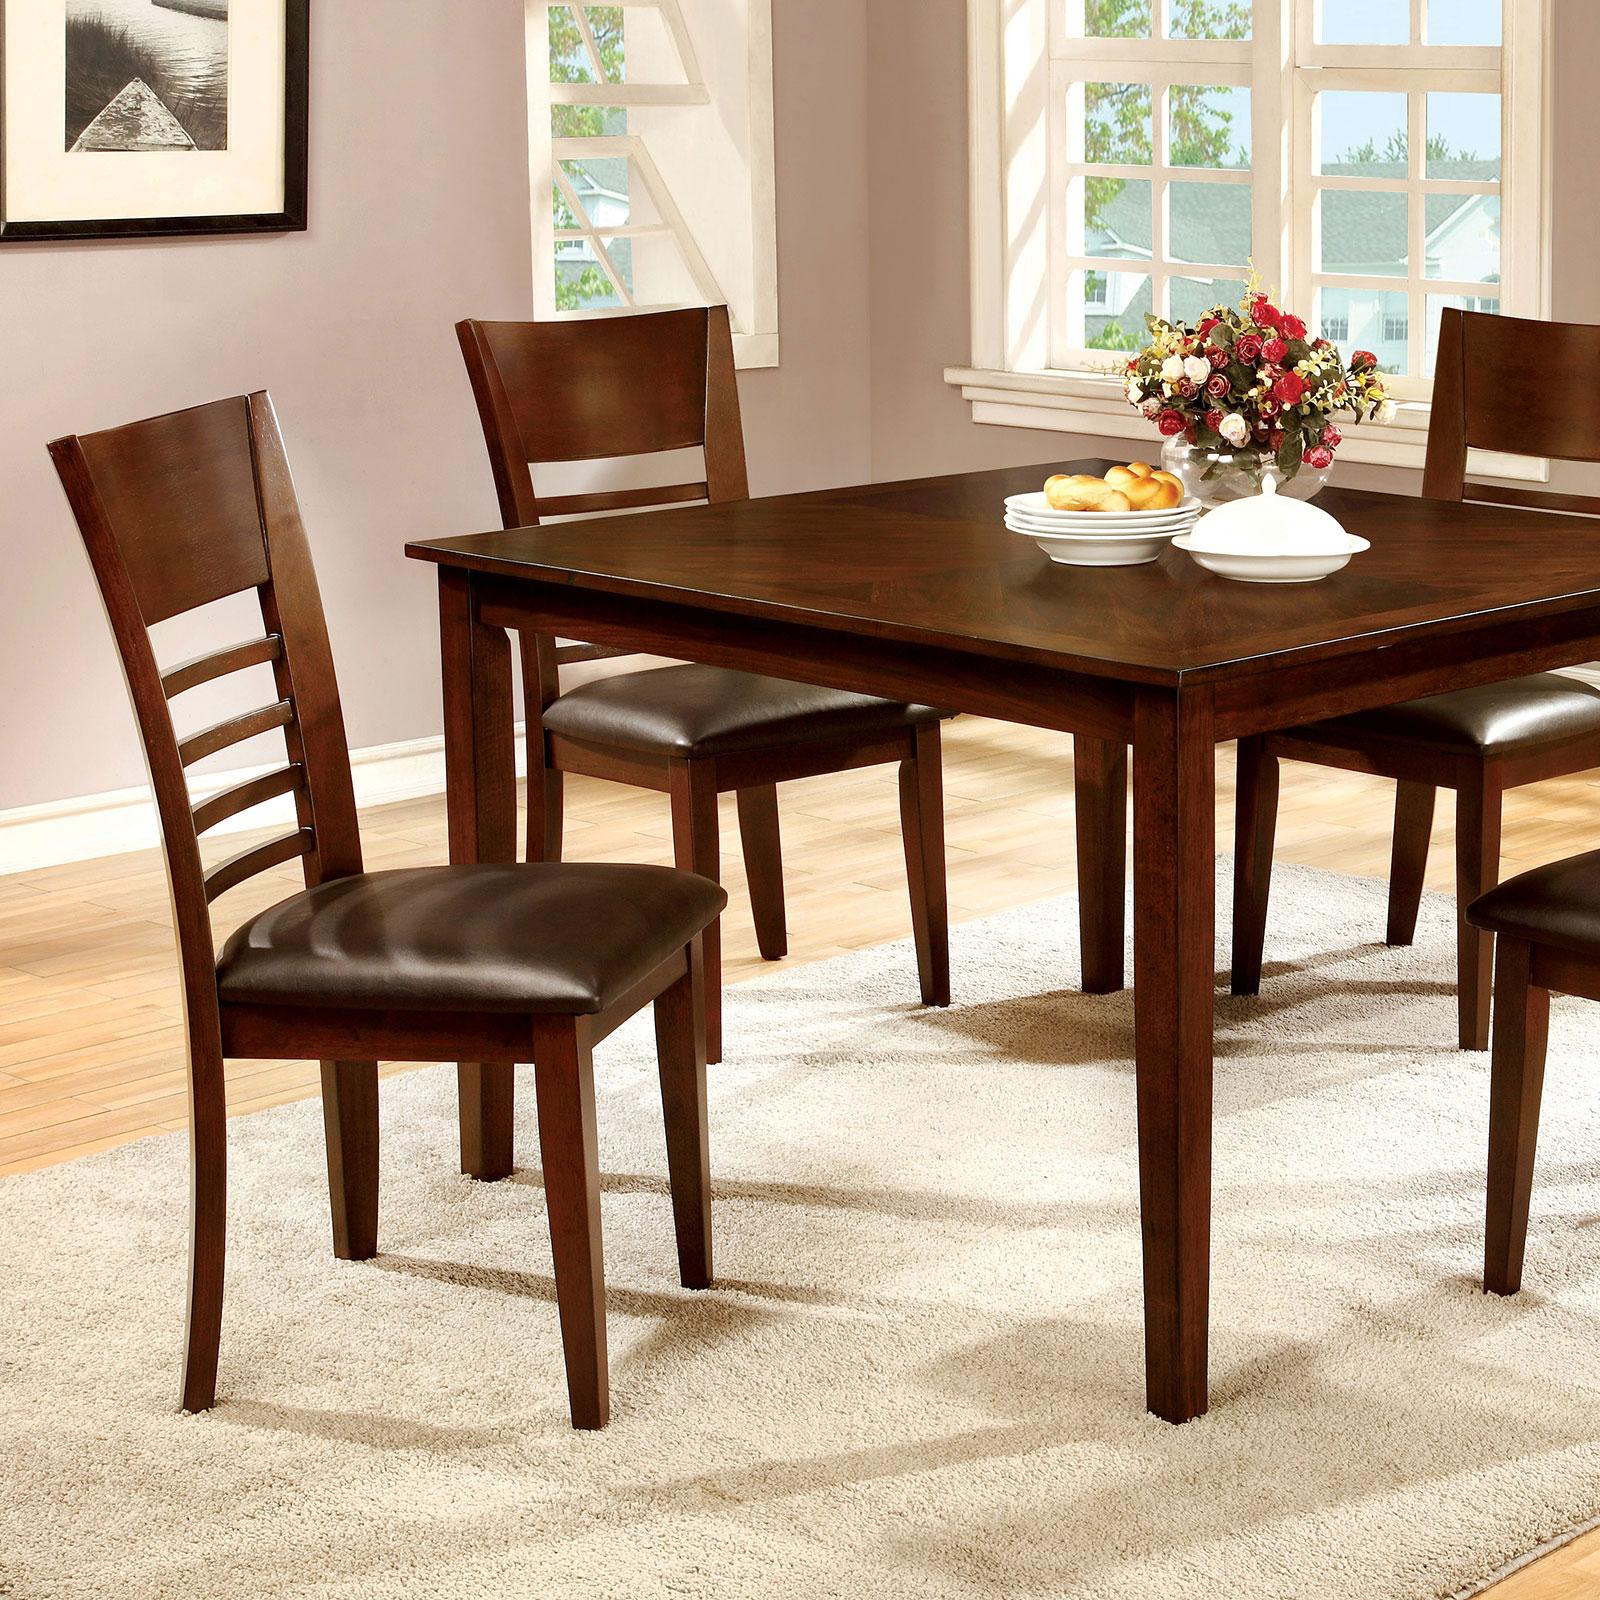 Transitional Dining Table Set HILLSVIEW CM3916T-5PK CM3916T-5PK in Brown Leatherette